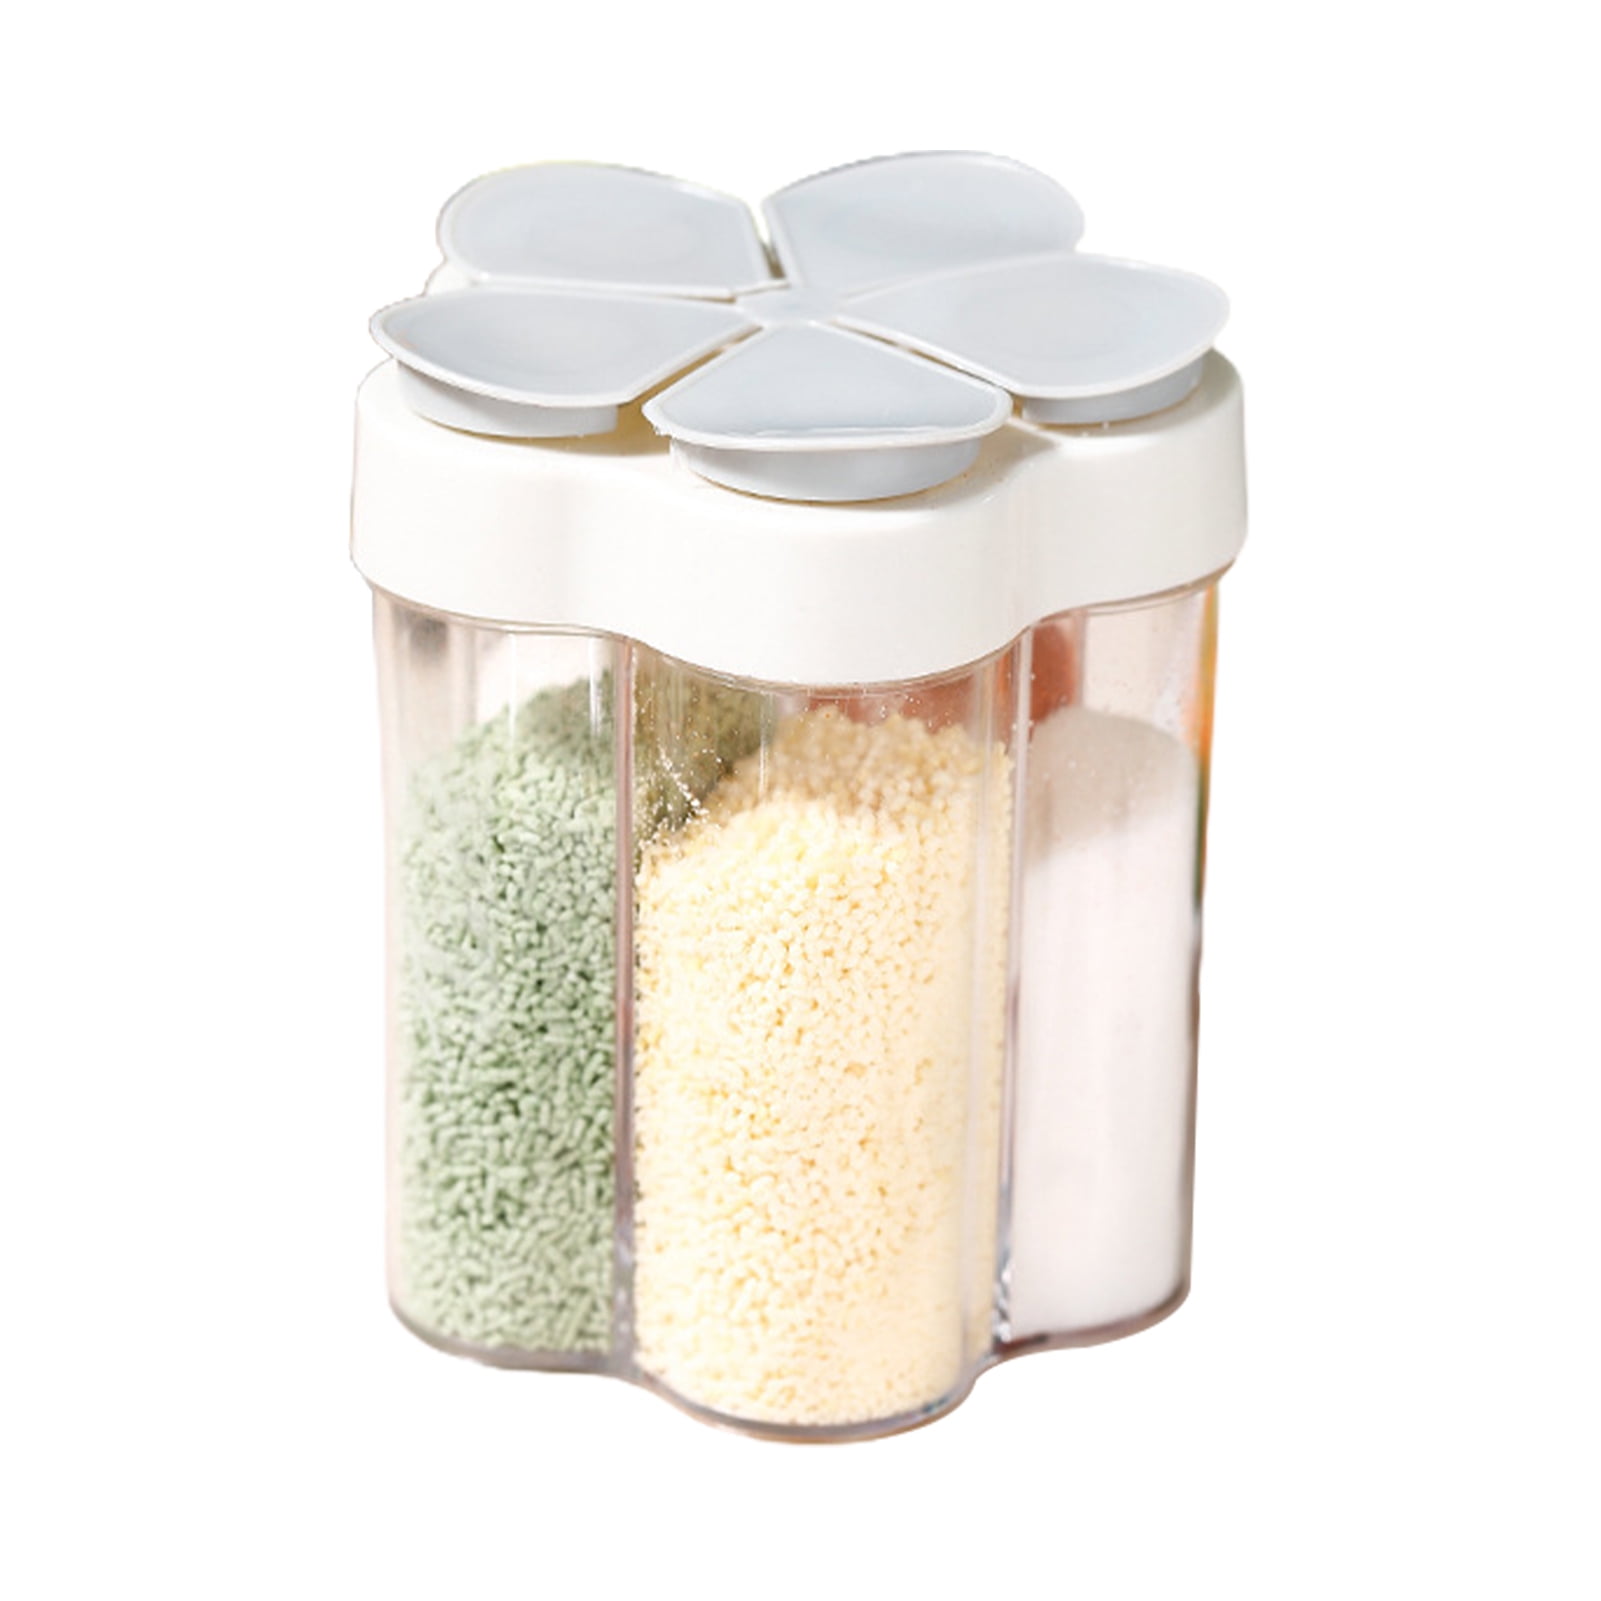 DWLOMHE 5 in 1 Travel Spice Containers, Shaker Jars, Clear Plastic Container Jars with Labels, Airtight Cap, Pour/Sift Shaker Green